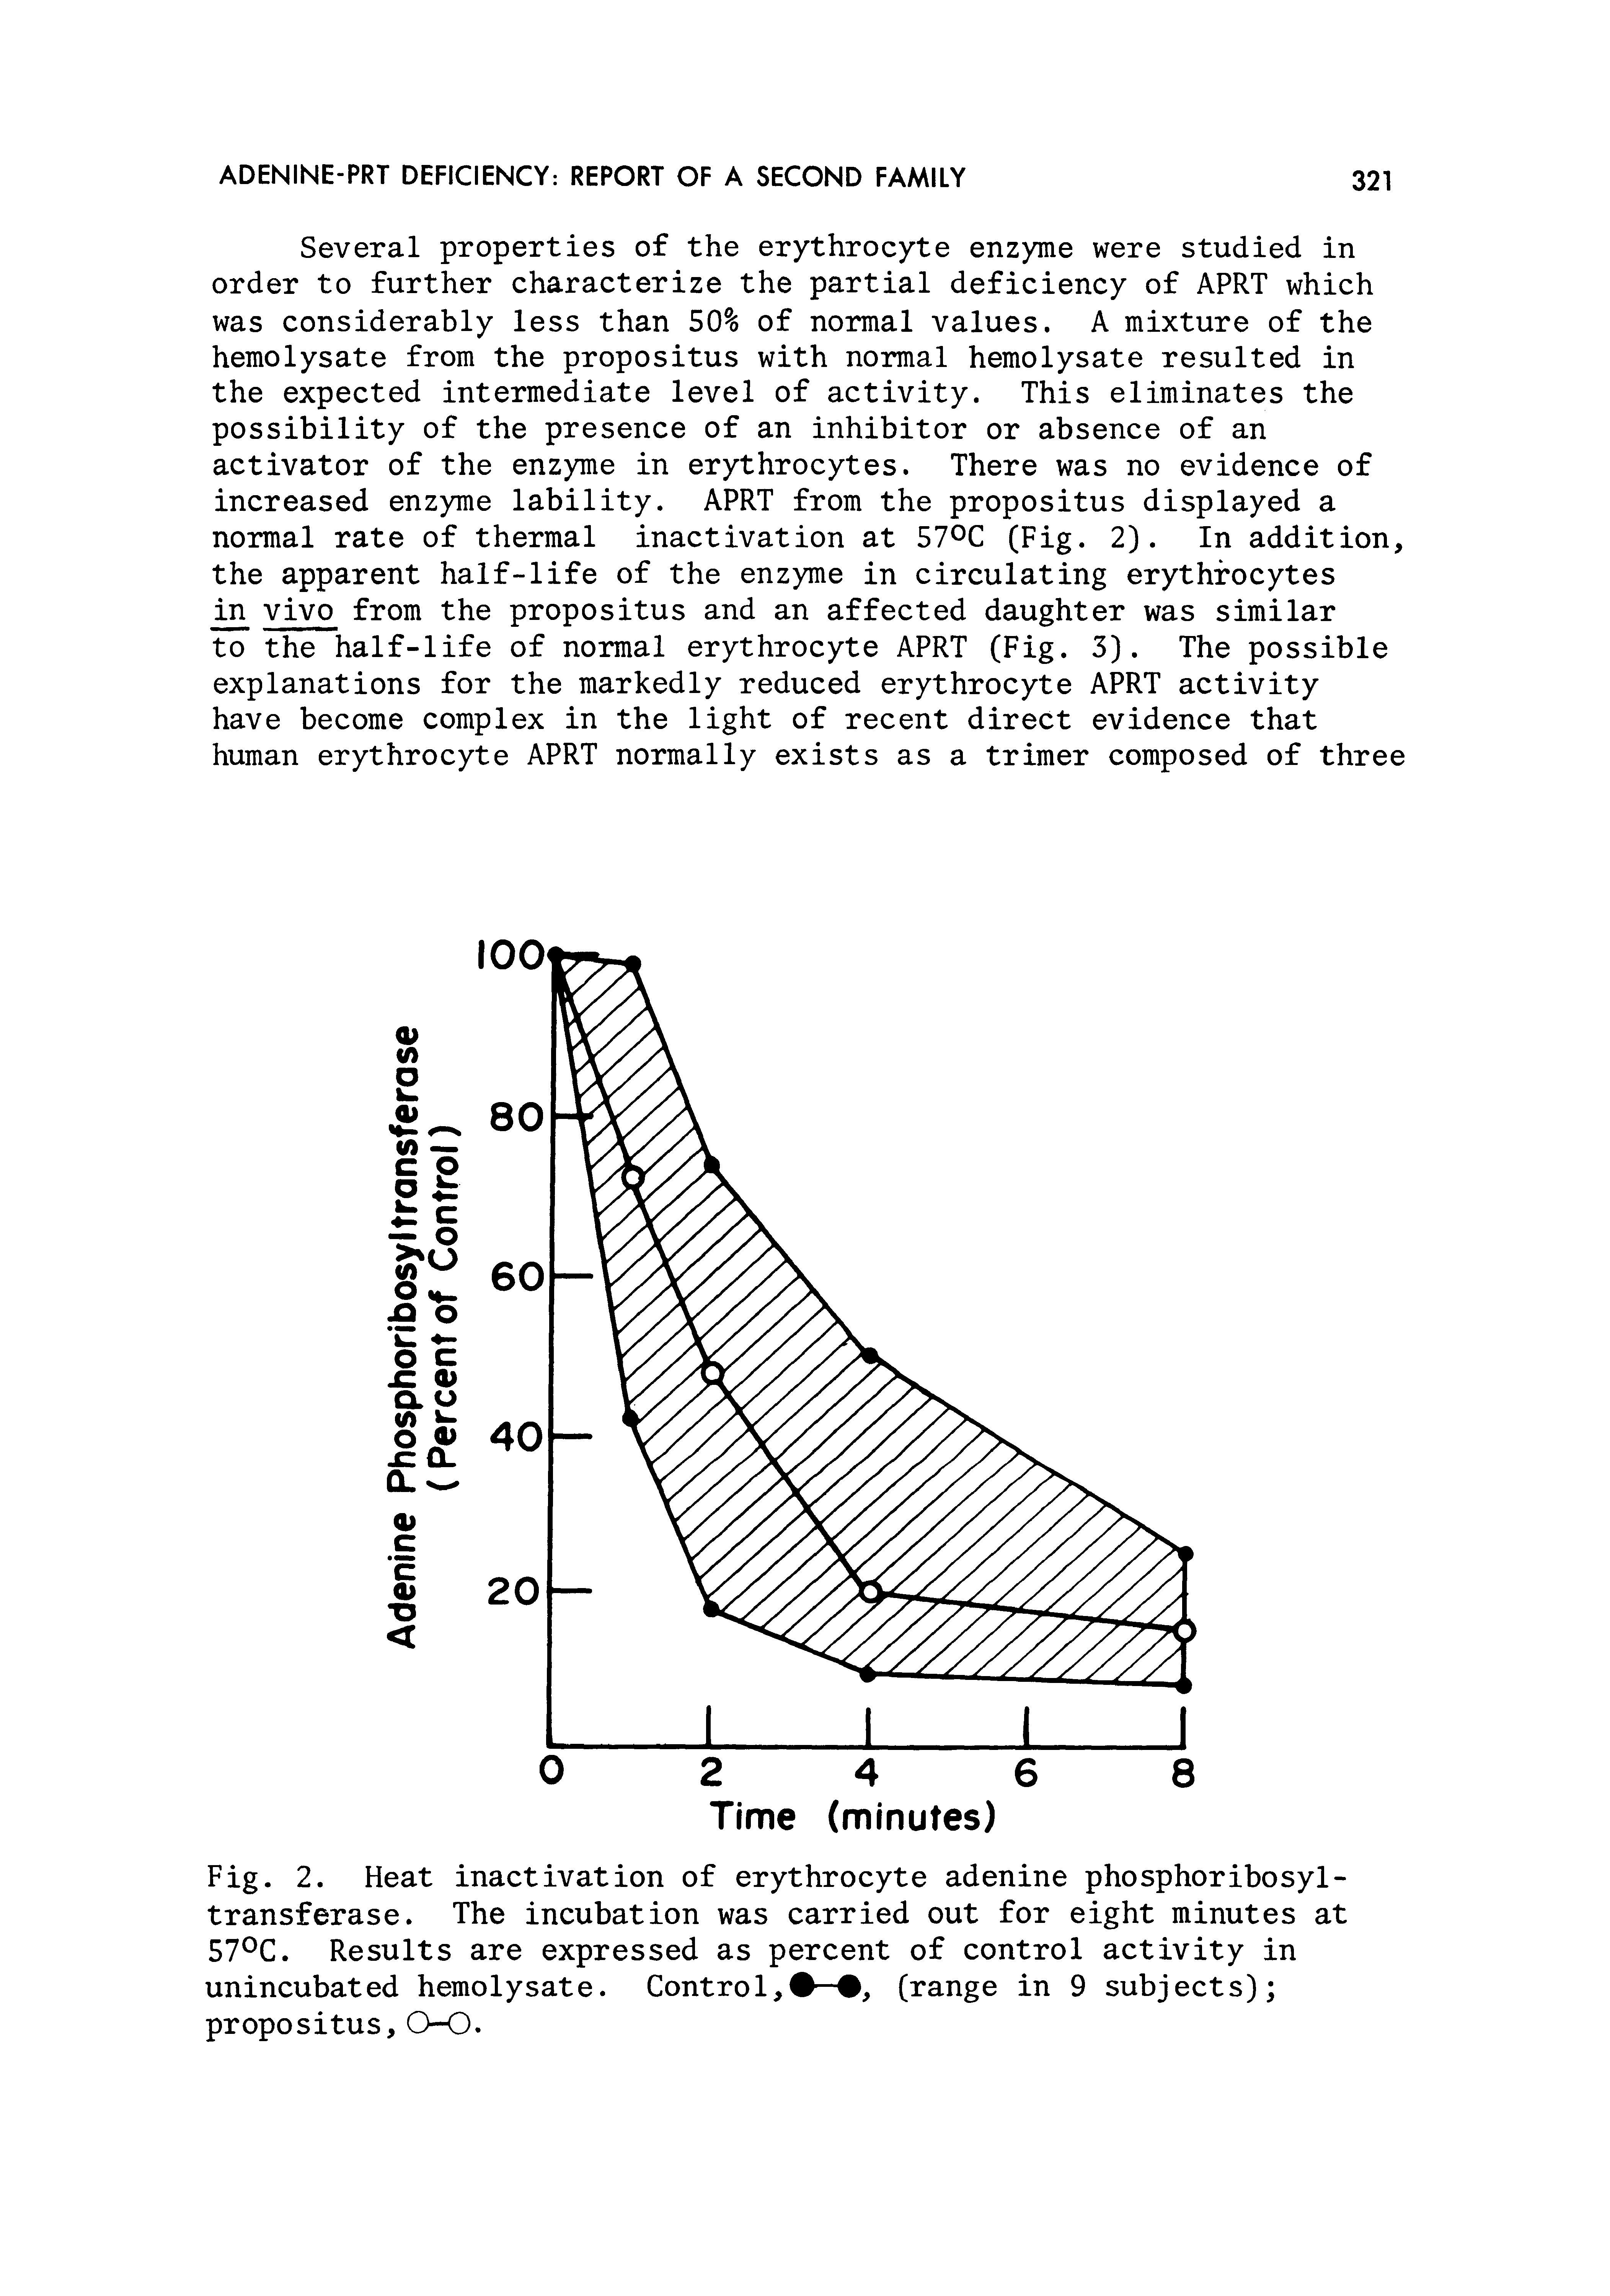 Fig. 2. Heat inactivation of erythrocyte adenine phosphoribosyl-transferase. The incubation was carried out for eight minutes at 57 C. Results are expressed as percent of control activity in unincubated hemolysate. Control, — , (range in 9 subjects) propositus, (3-0.